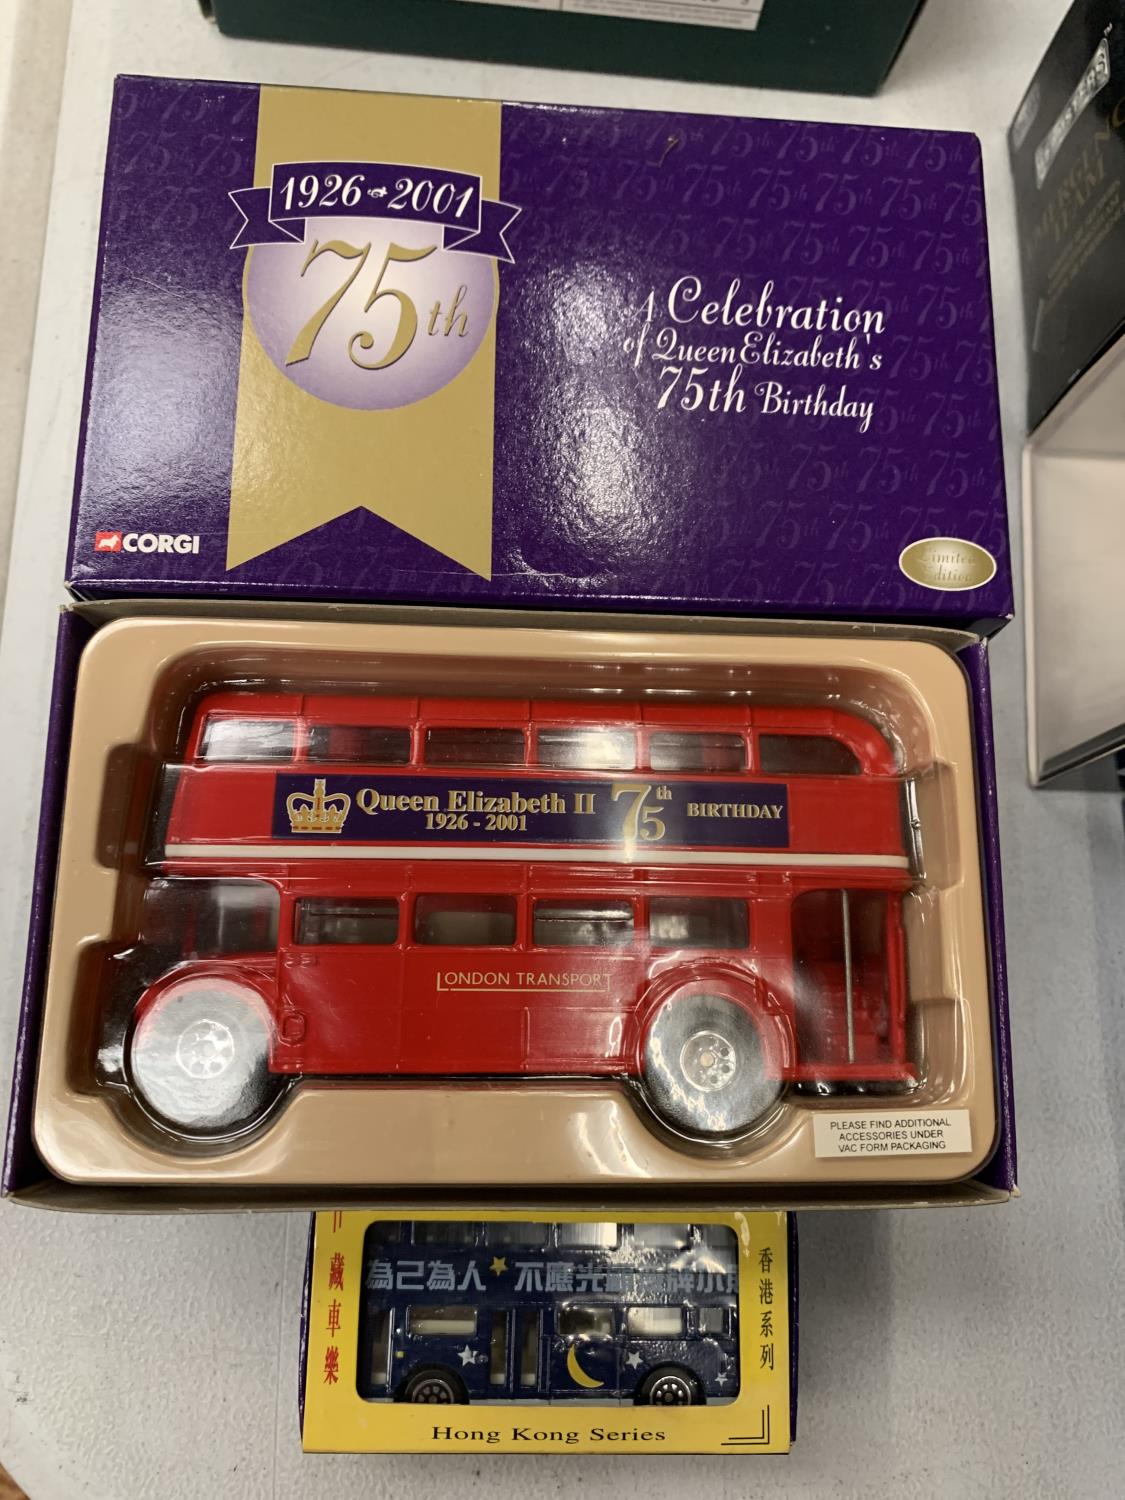 A BOXED CORGI BUS TO MARK THE CELEBRATION OF QUEEN ELIZABETH'S 75TH BIRTHDAY AND A HONG KONG